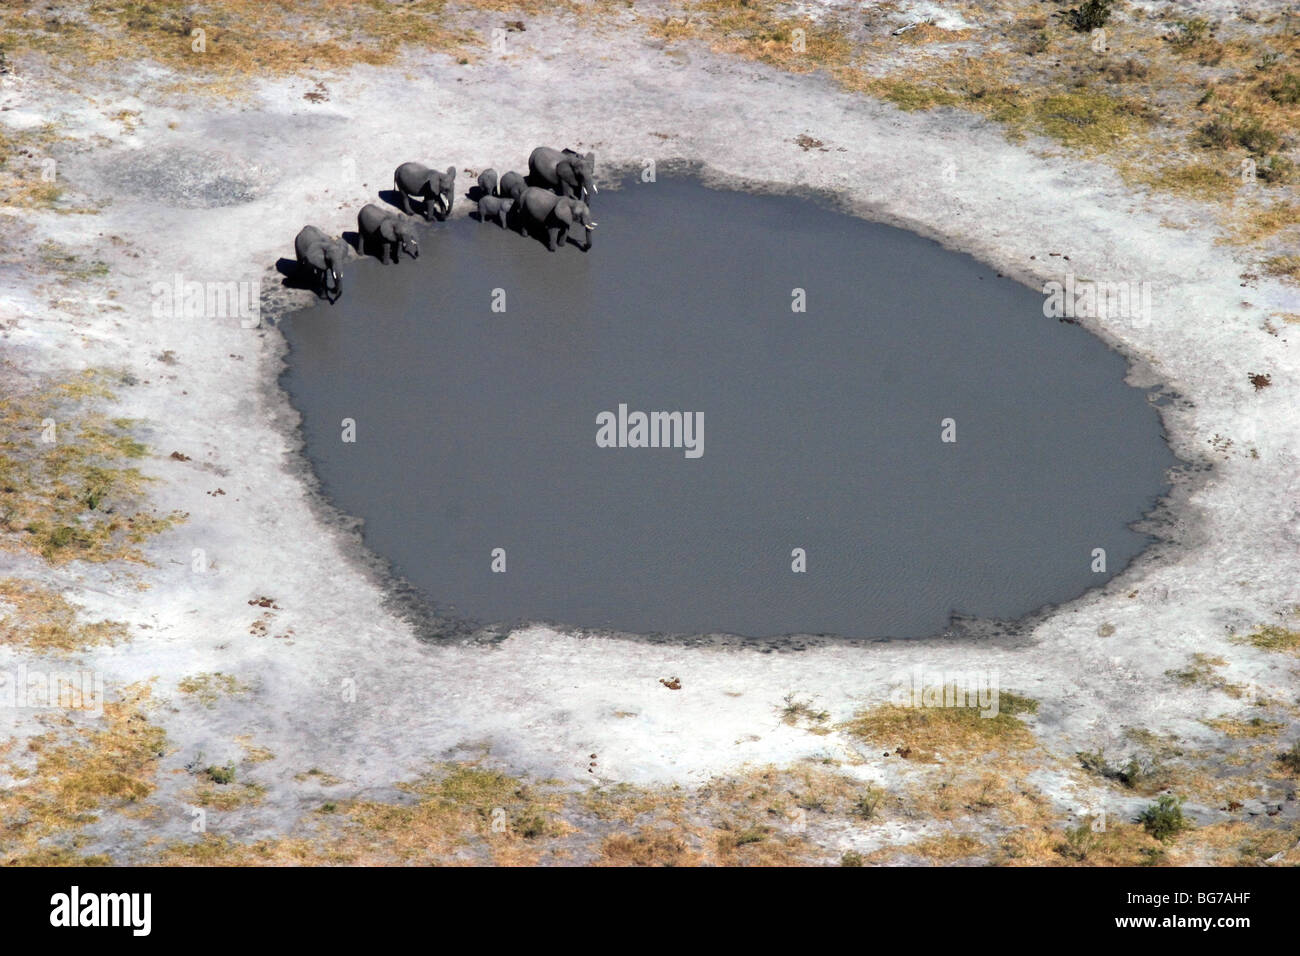 Aerial of African elephants at a watering hole Stock Photo